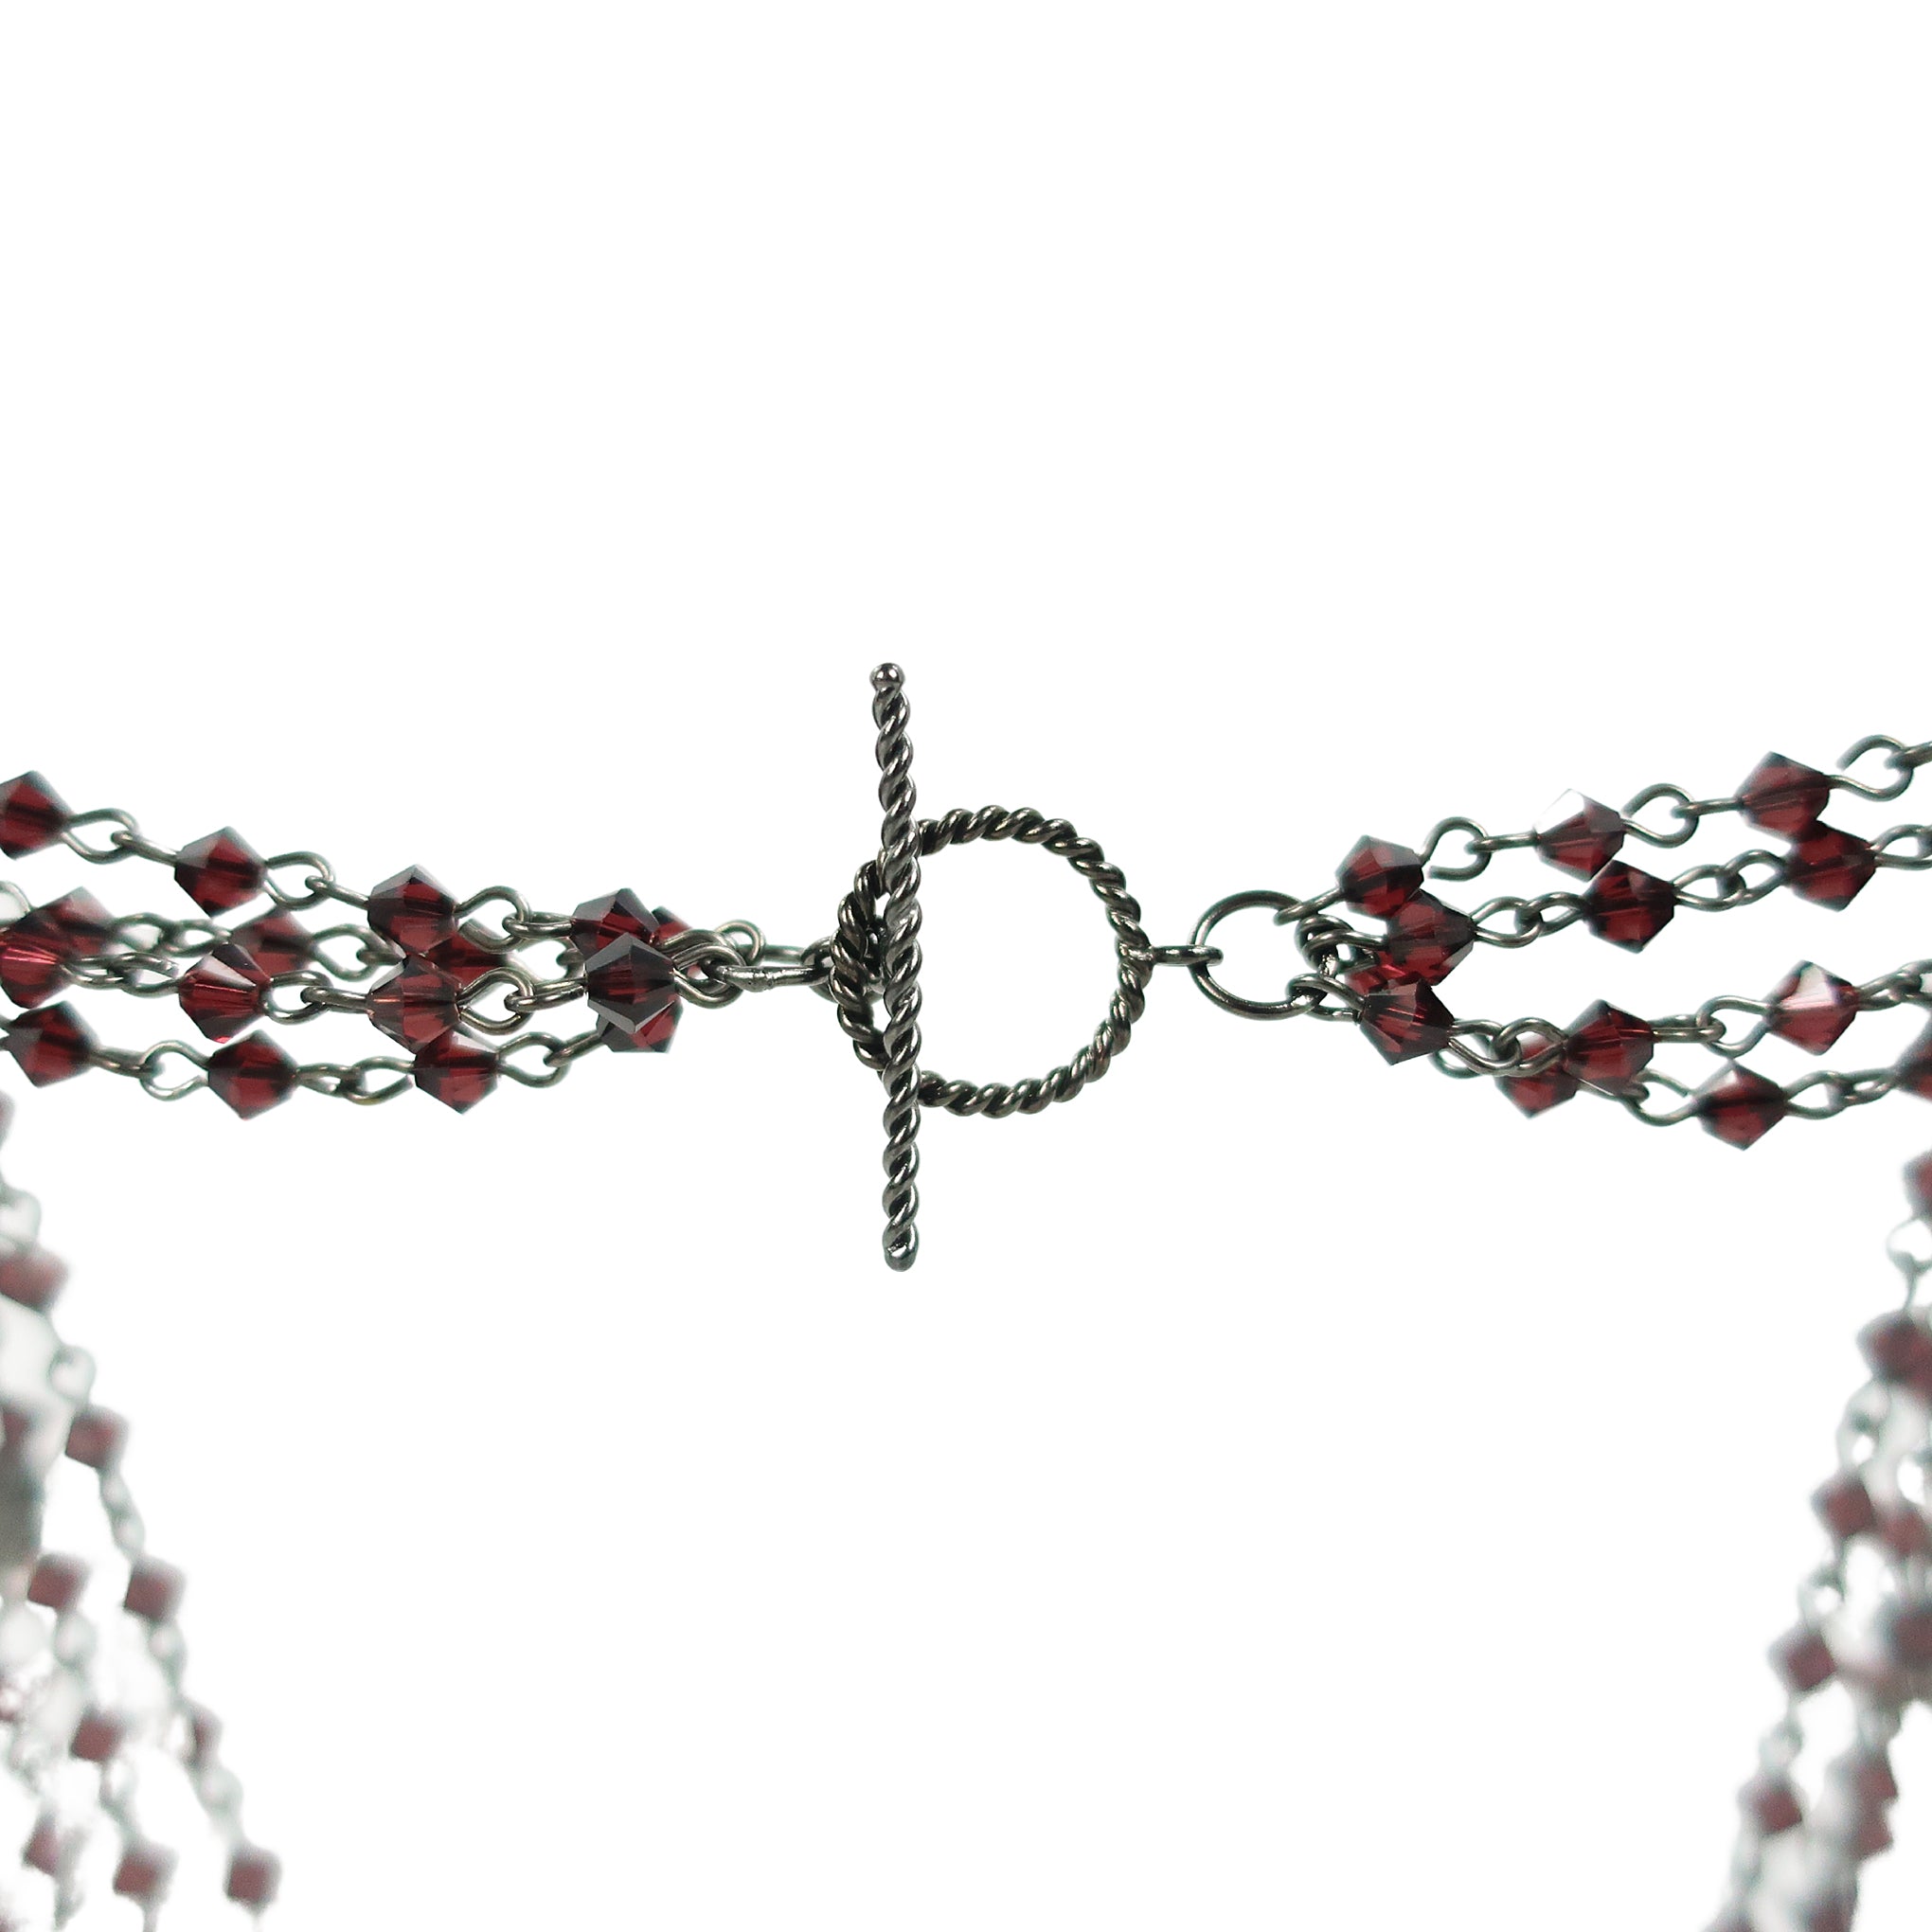 VSA Magdalena Statement Necklace in Gunmetal and 4mm Bicone Burgundy Crystal